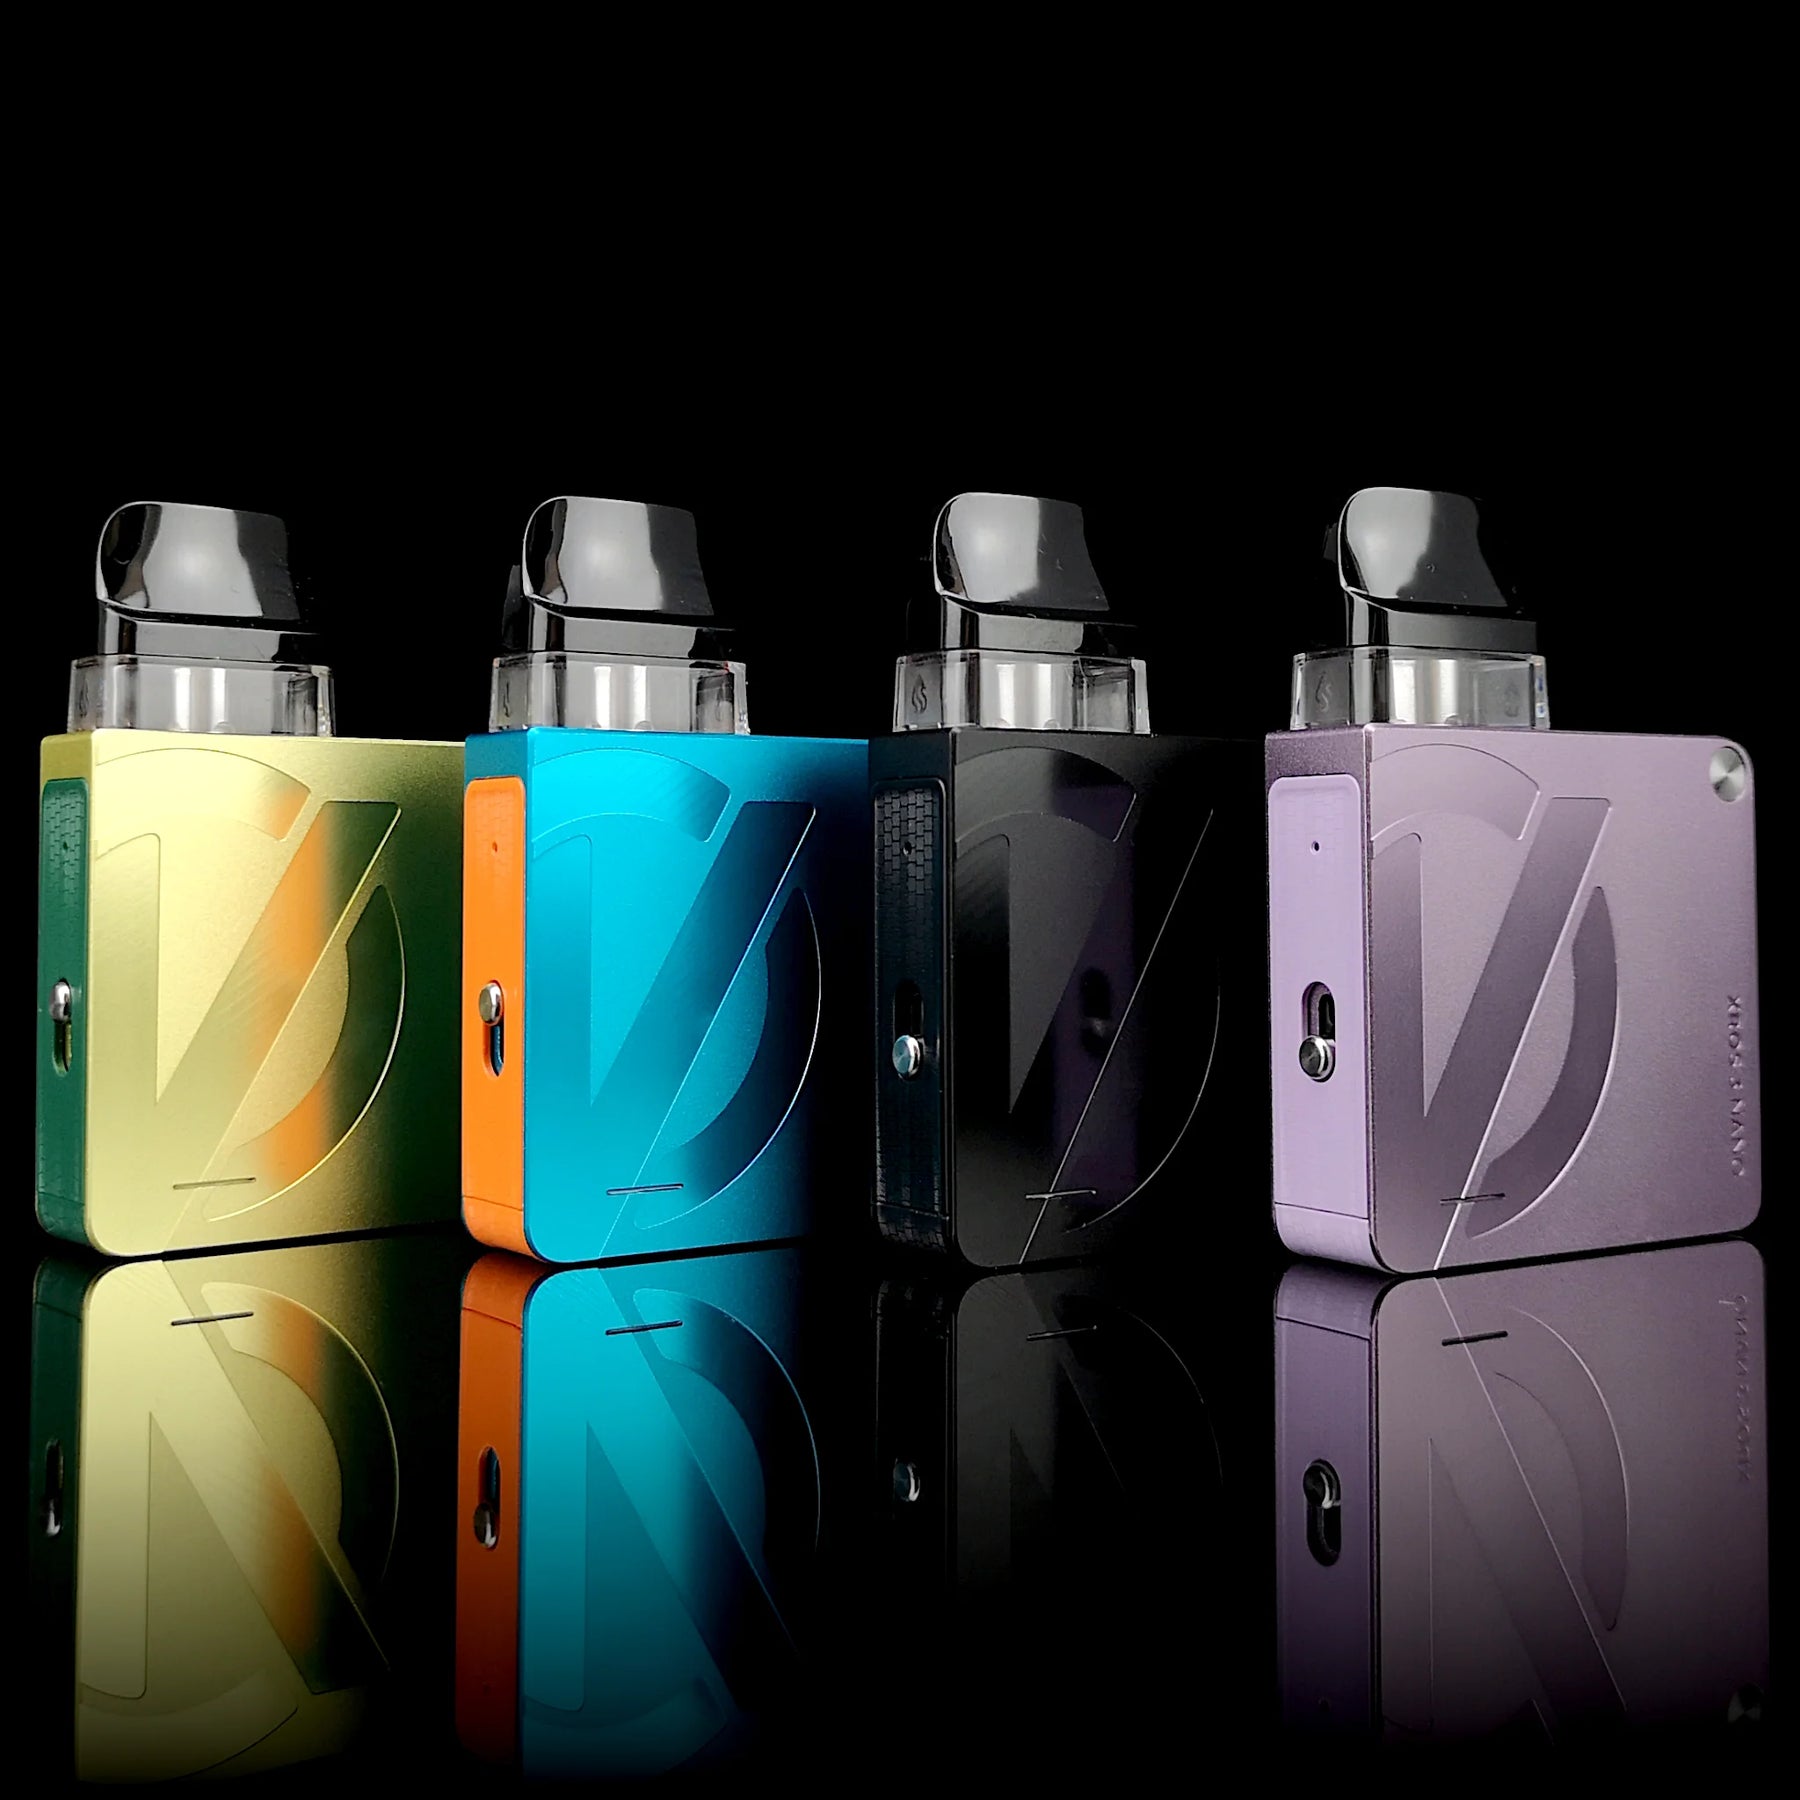 Vaporesso Xros 3 Nano Pod Kit: Unveiling the Device of the Week – Innovation, Performance, and Flavor Excellence